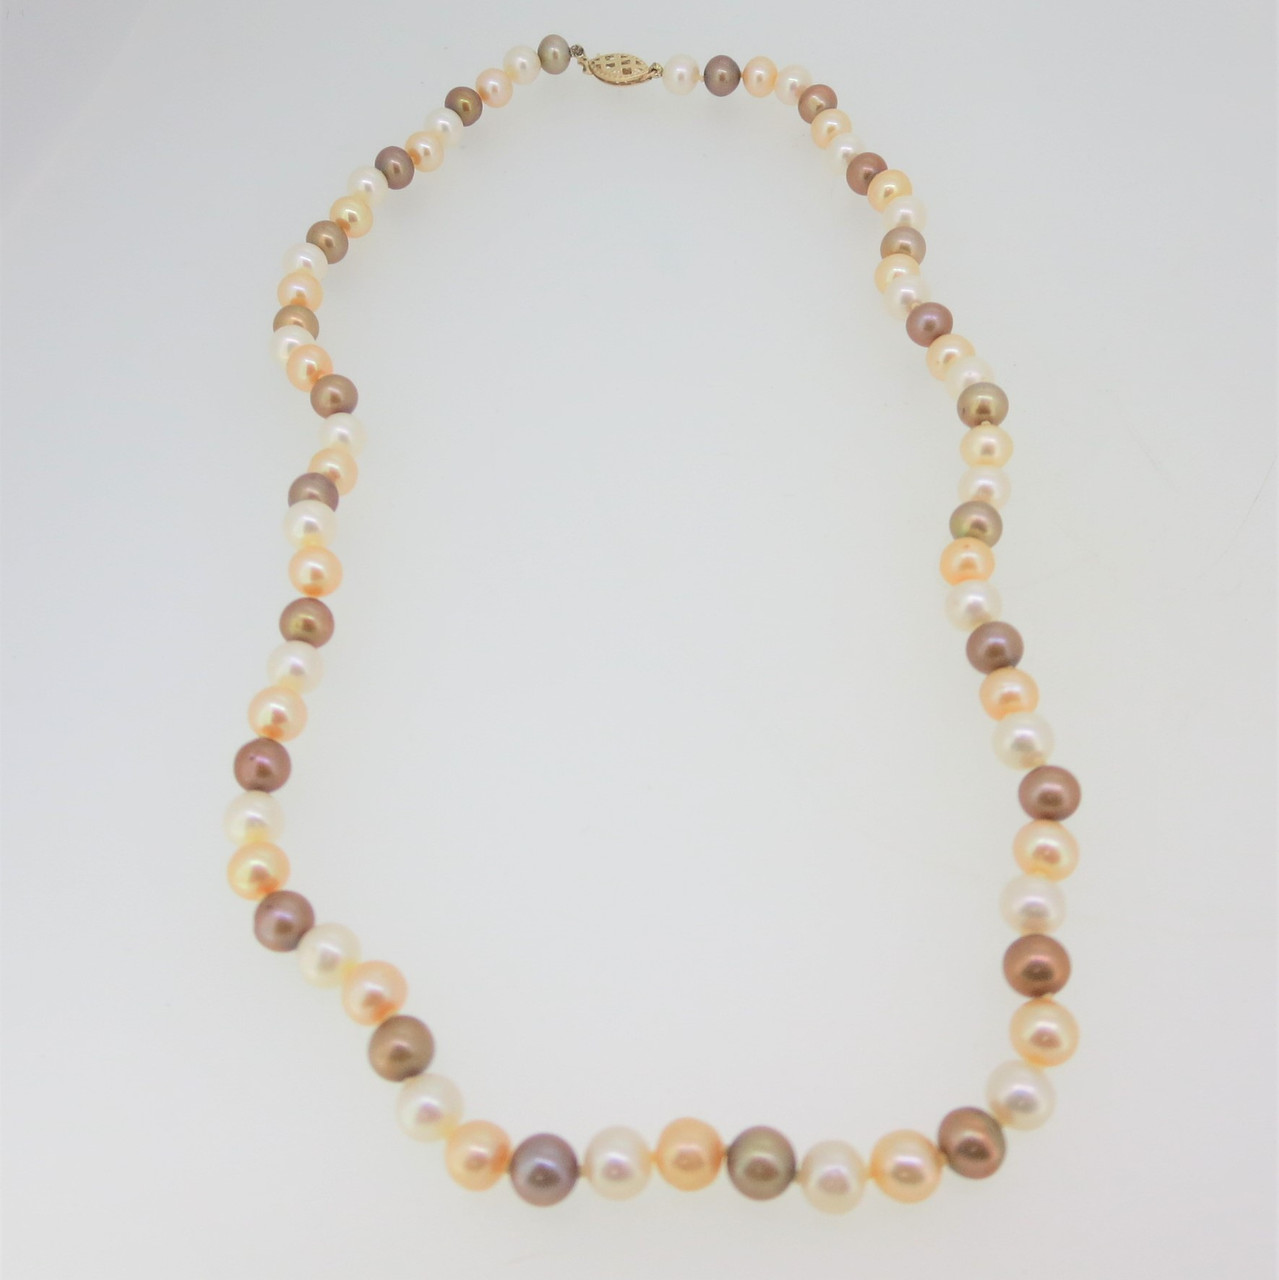 Double Strand Cultured Pearl Necklace with 14K Gold Clasp